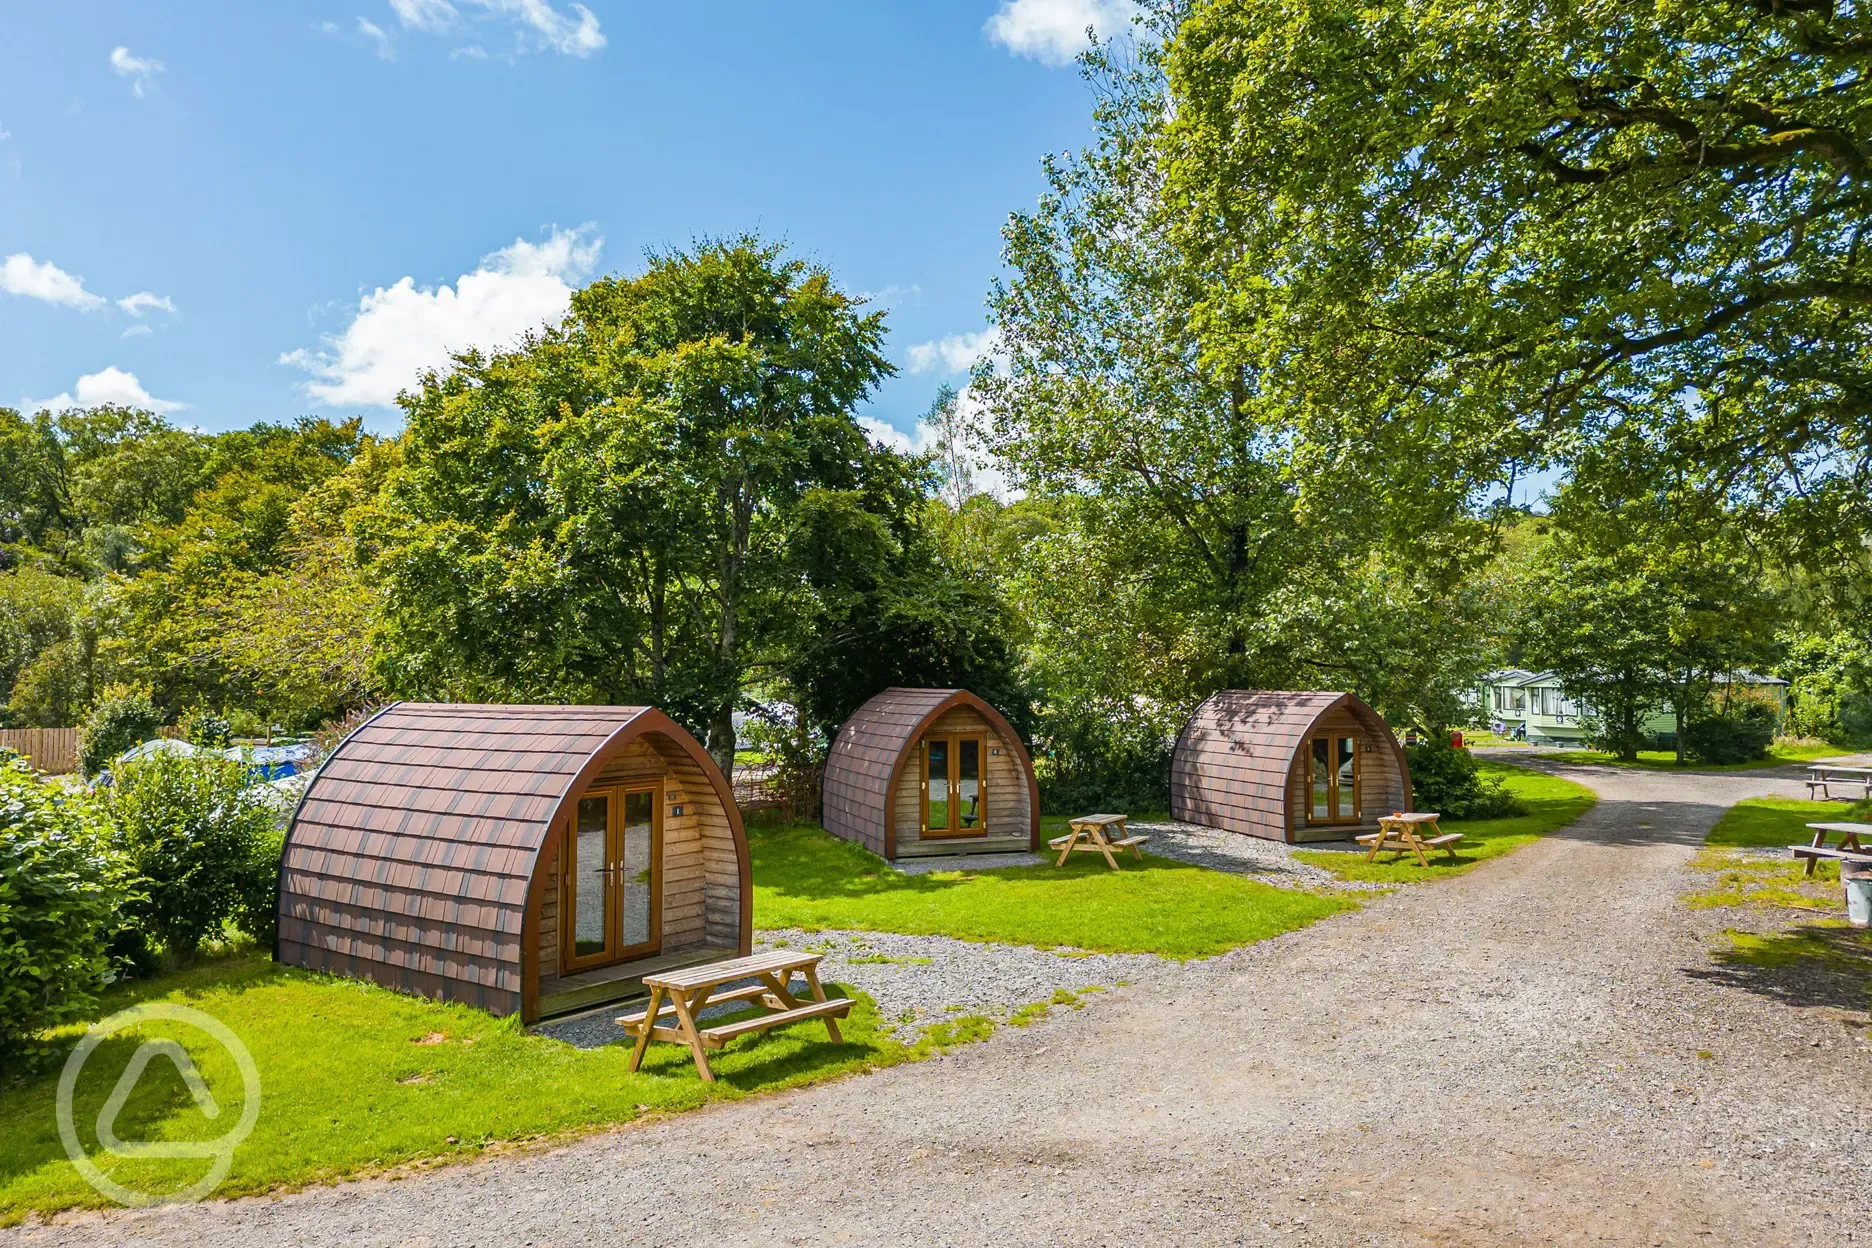 Camping pods